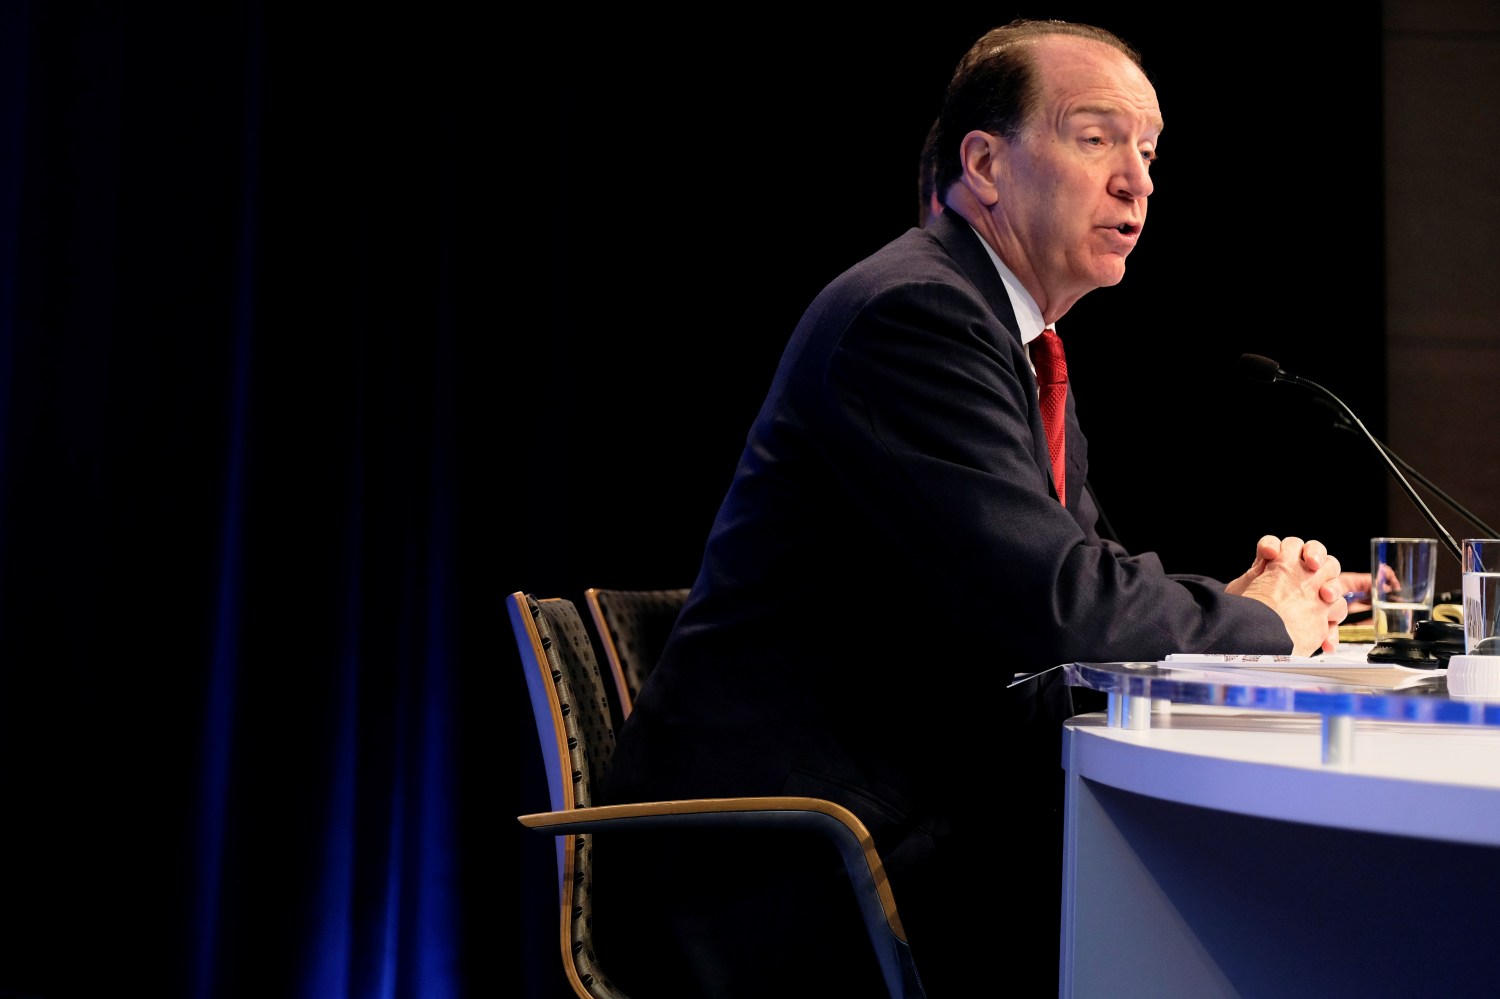 World Bank President David Malpass speaks during a news conference at the Spring Meetings of the World Bank Group and IMF in Washington, U.S., April 11, 2019. REUTERS/James Lawler Duggan